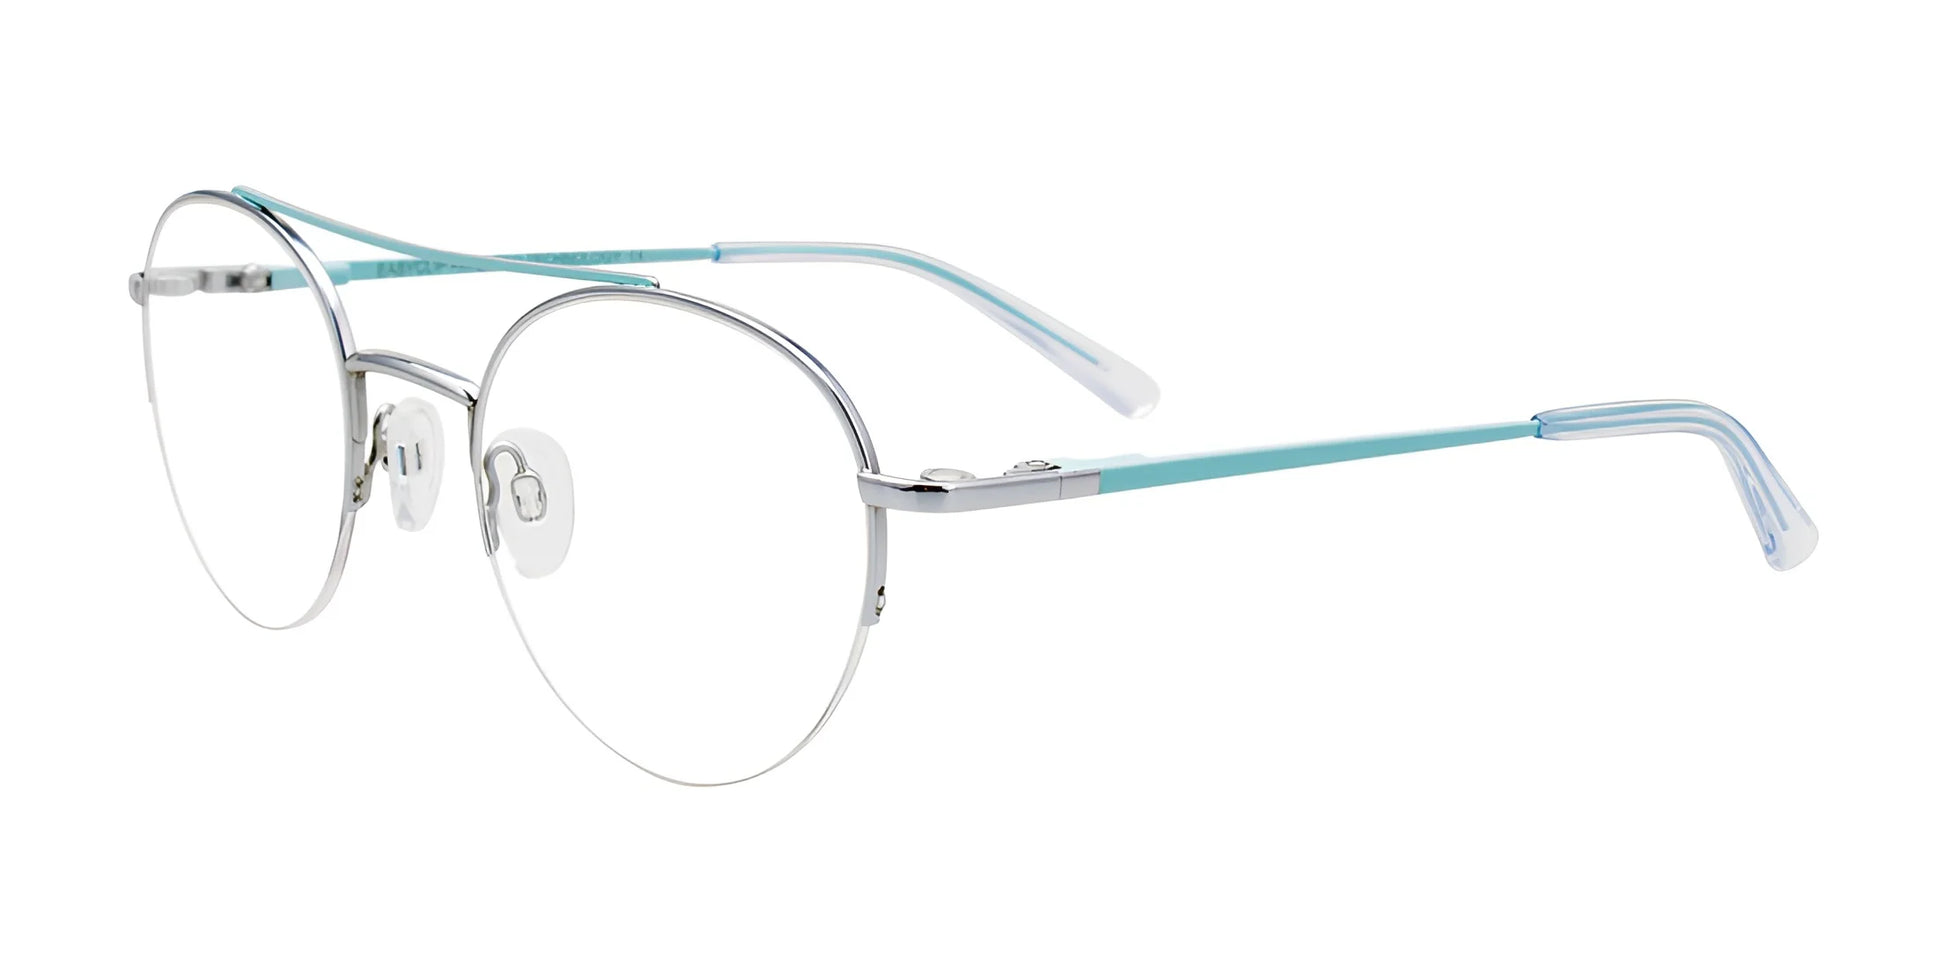 EasyClip EC574 Eyeglasses with Clip-on Sunglasses Silver & Turquoise